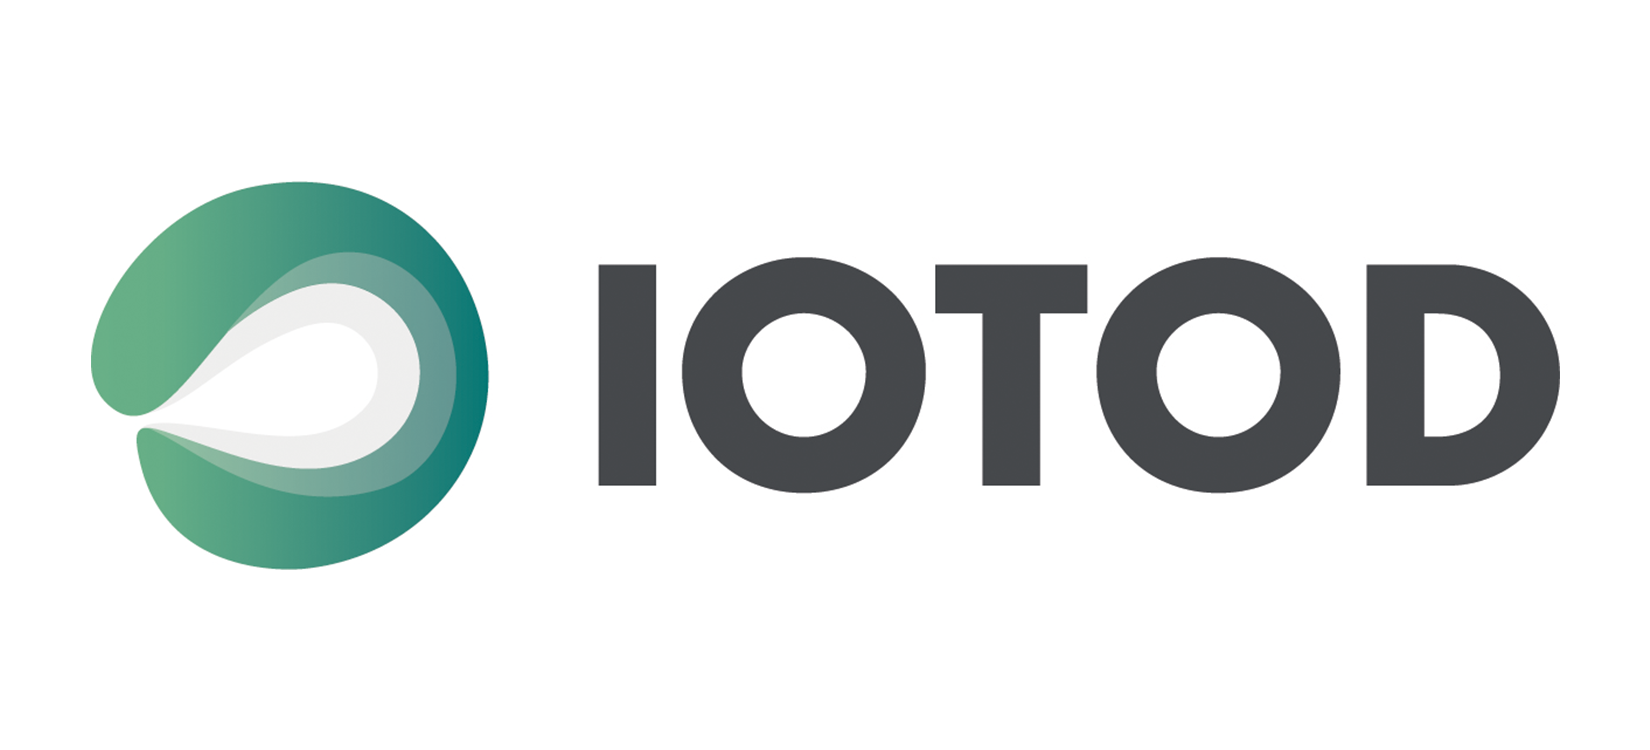 IOTOD conference